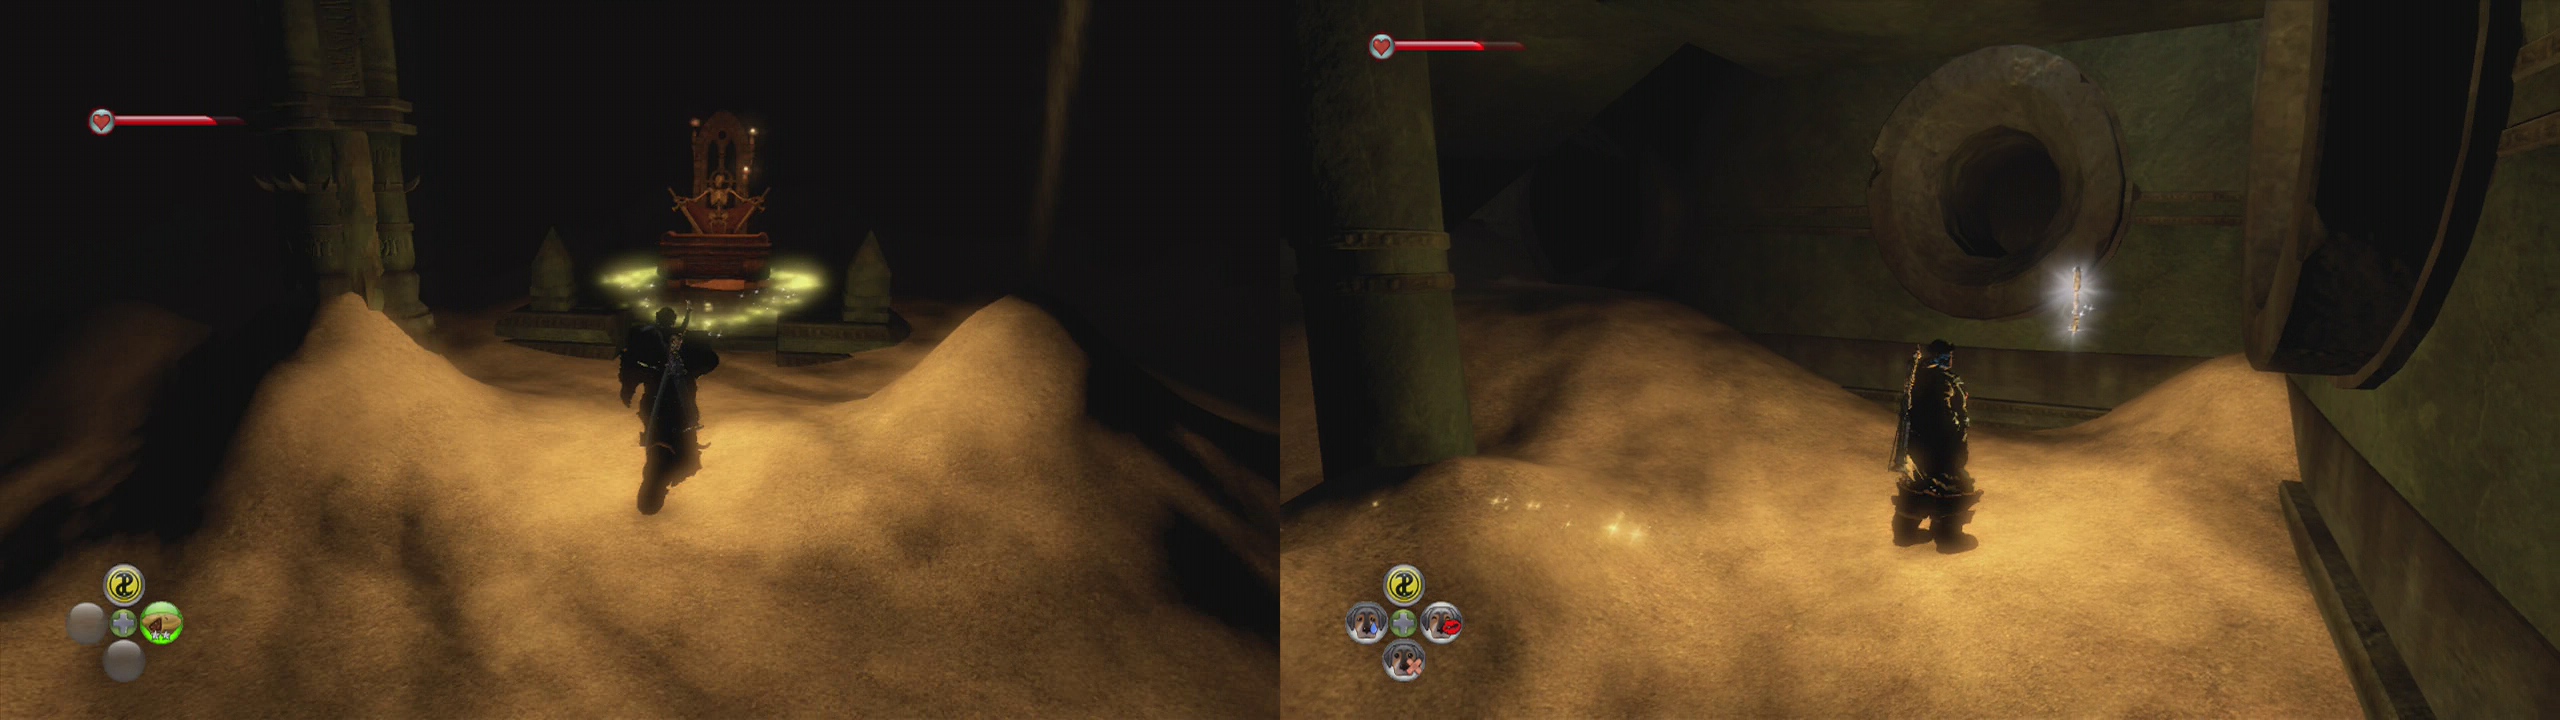 Open the glowing coffin for the body part (left) and then make your way out of the tomb. Look out for the silver key below the stairs leading to the exit (right).